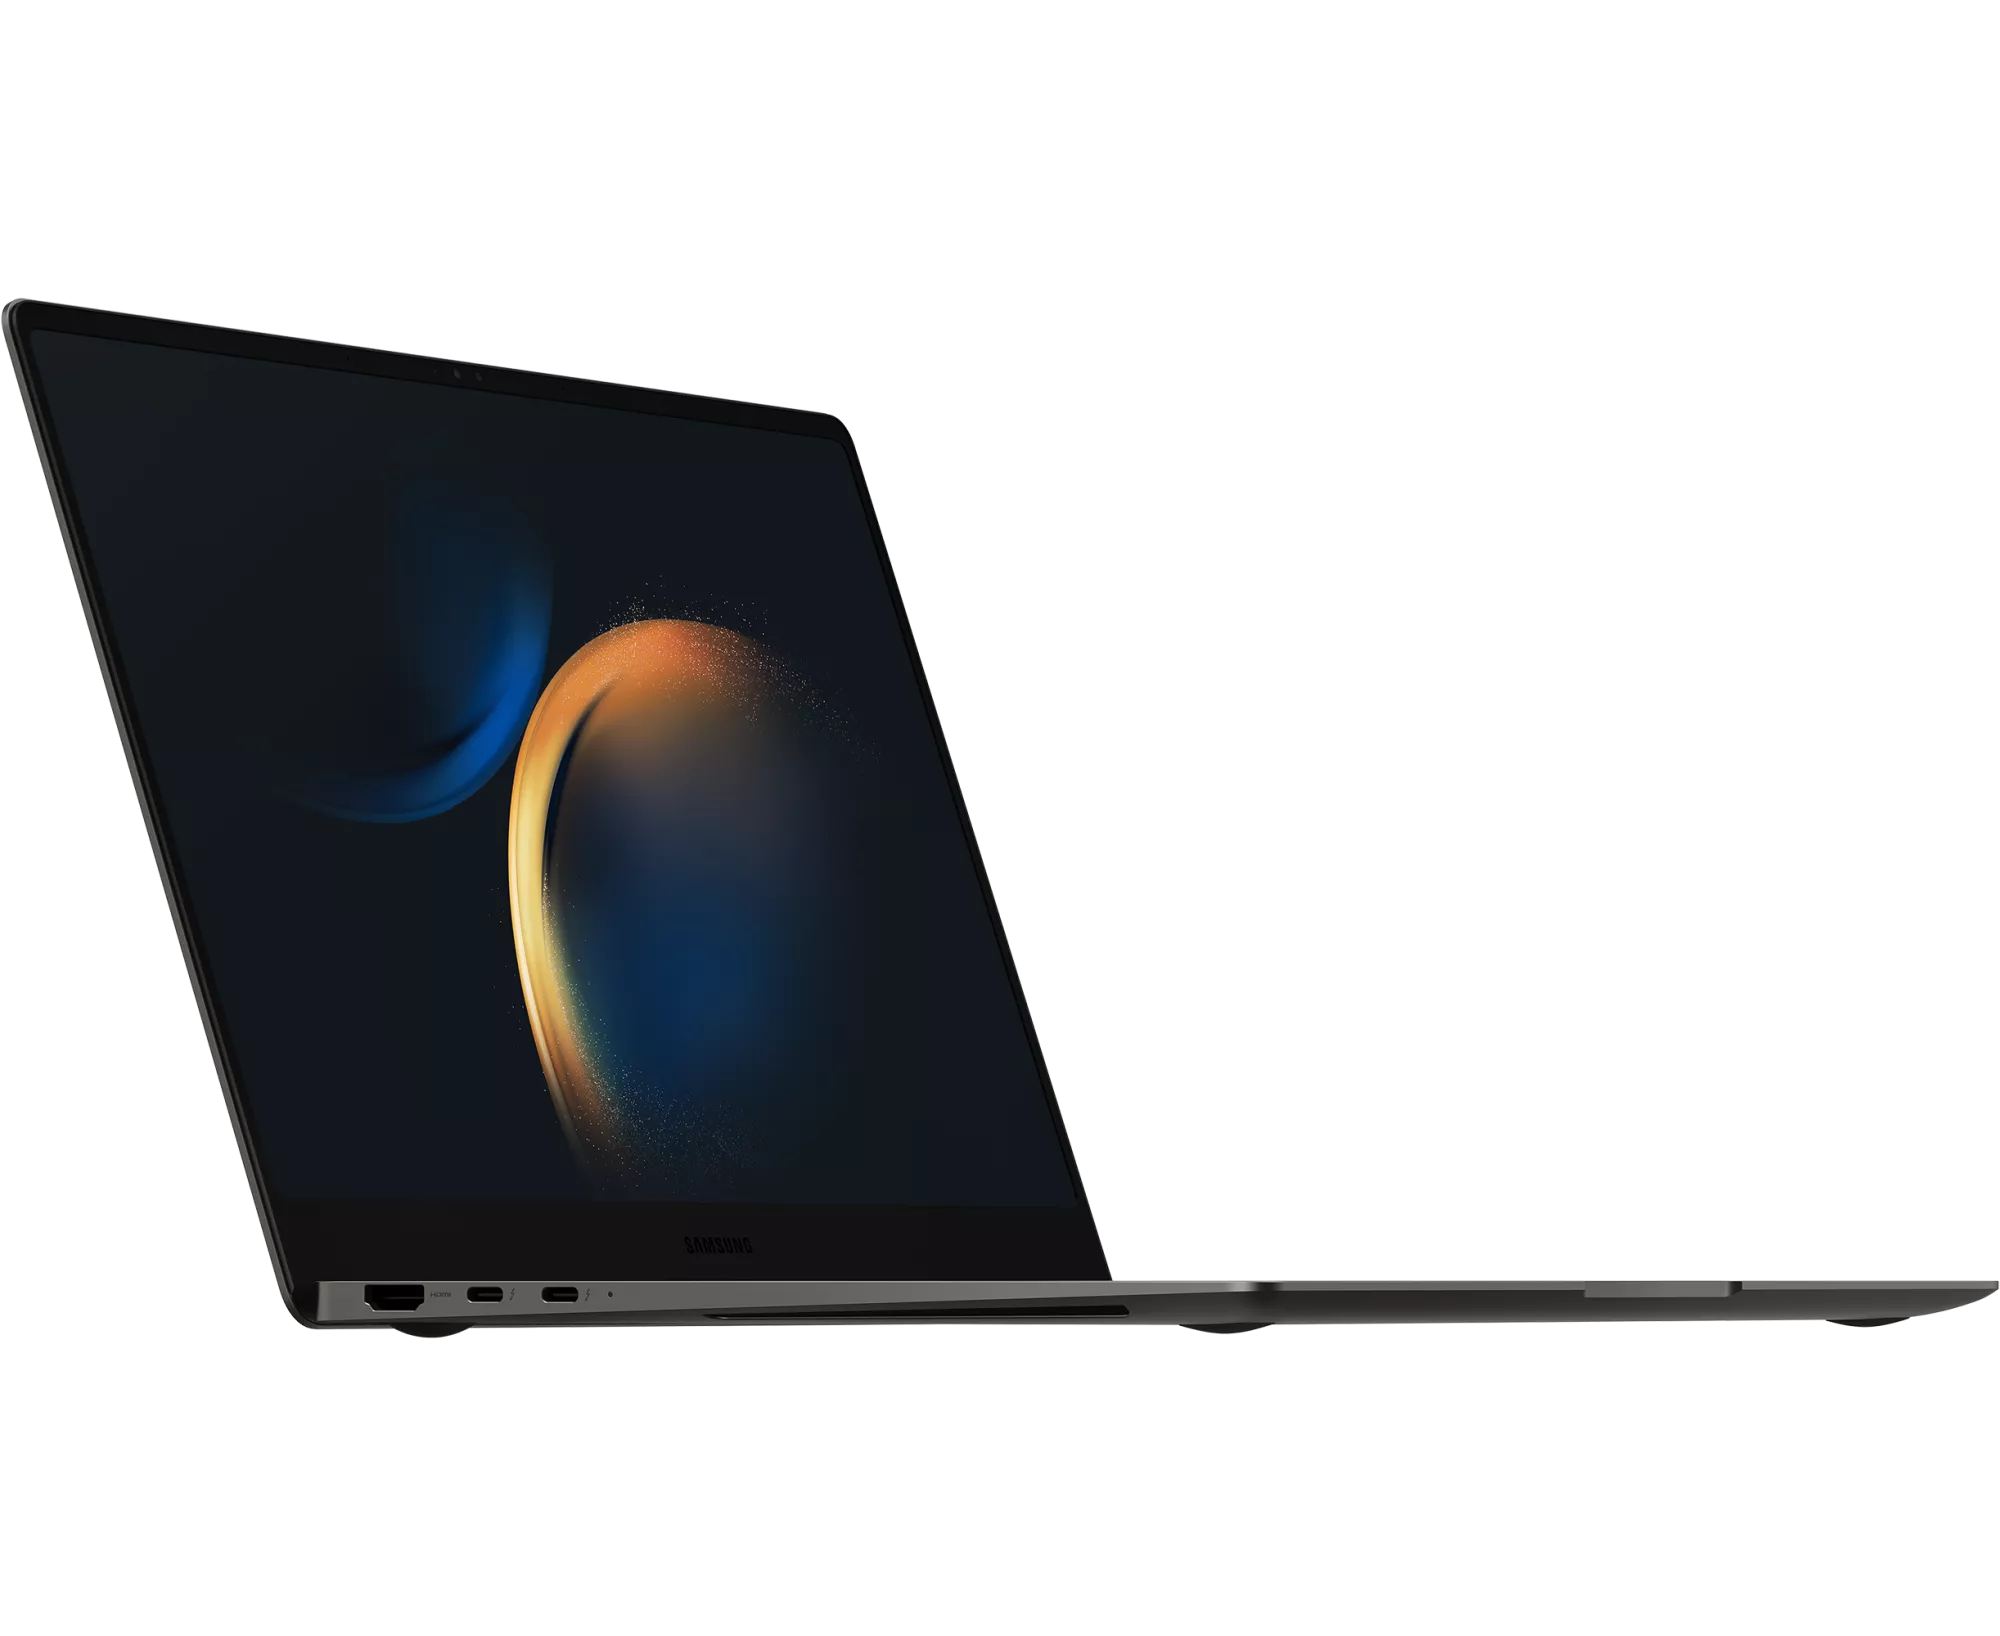 Galaxy Book 3 Series Proves Samsung's Pro Laptops Are Leveling Up